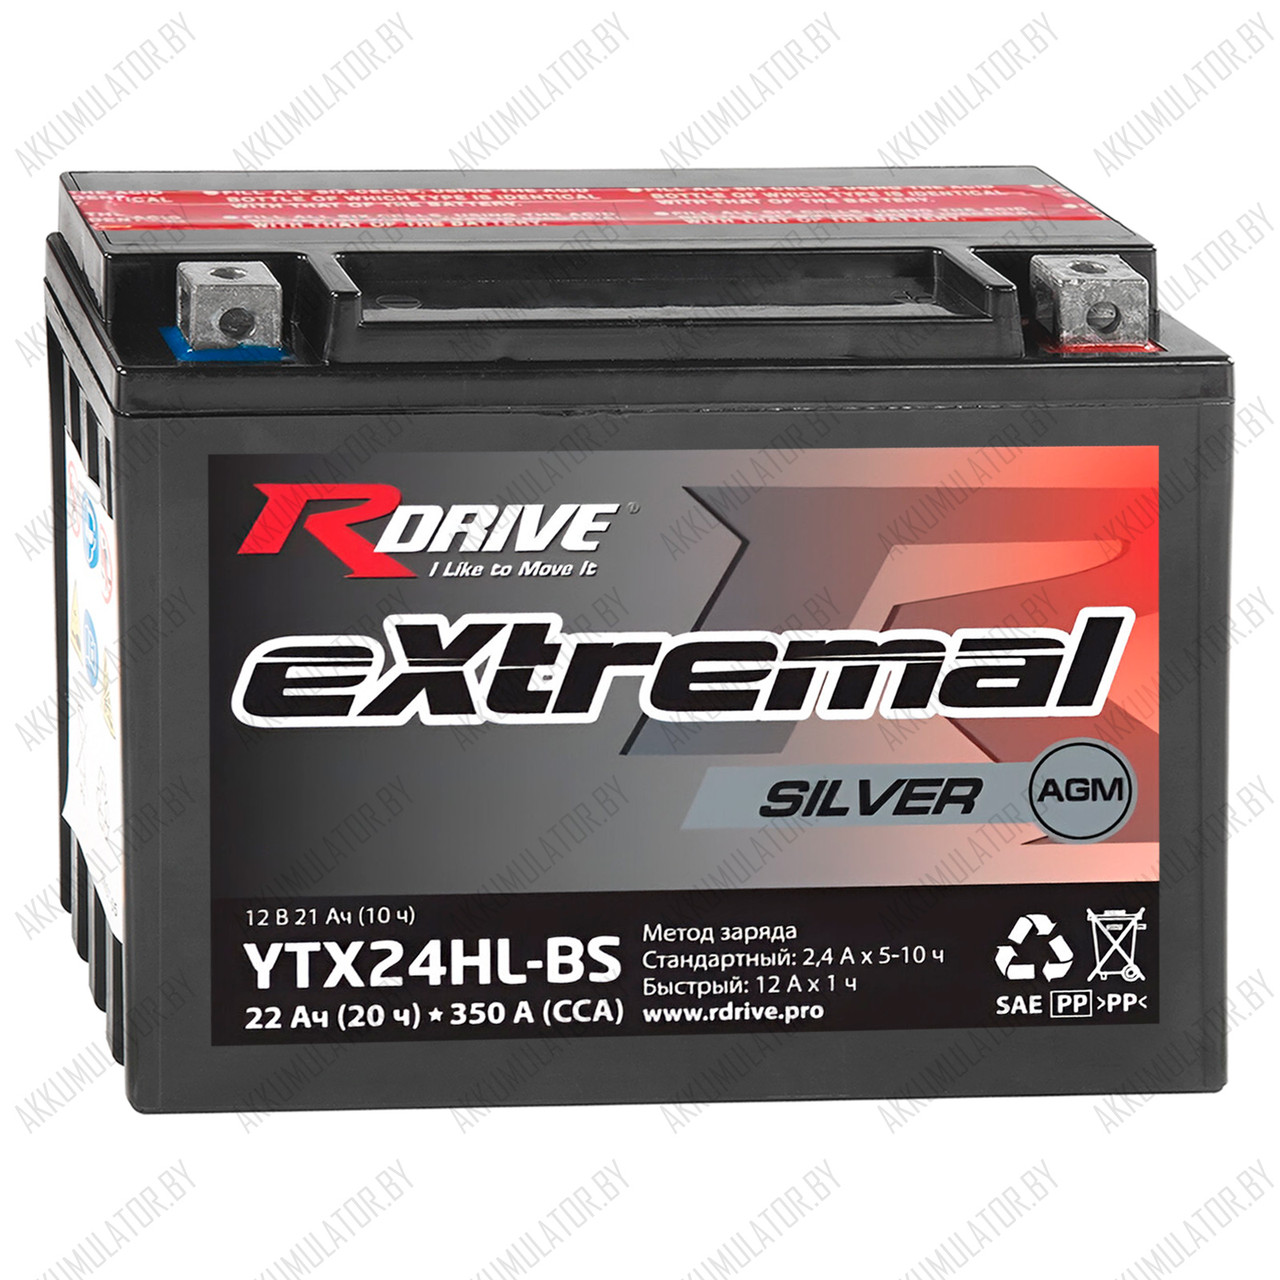 RDrive eXtremal Silver YTX24HL-BS / 22Ah - фото 1 - id-p223818767